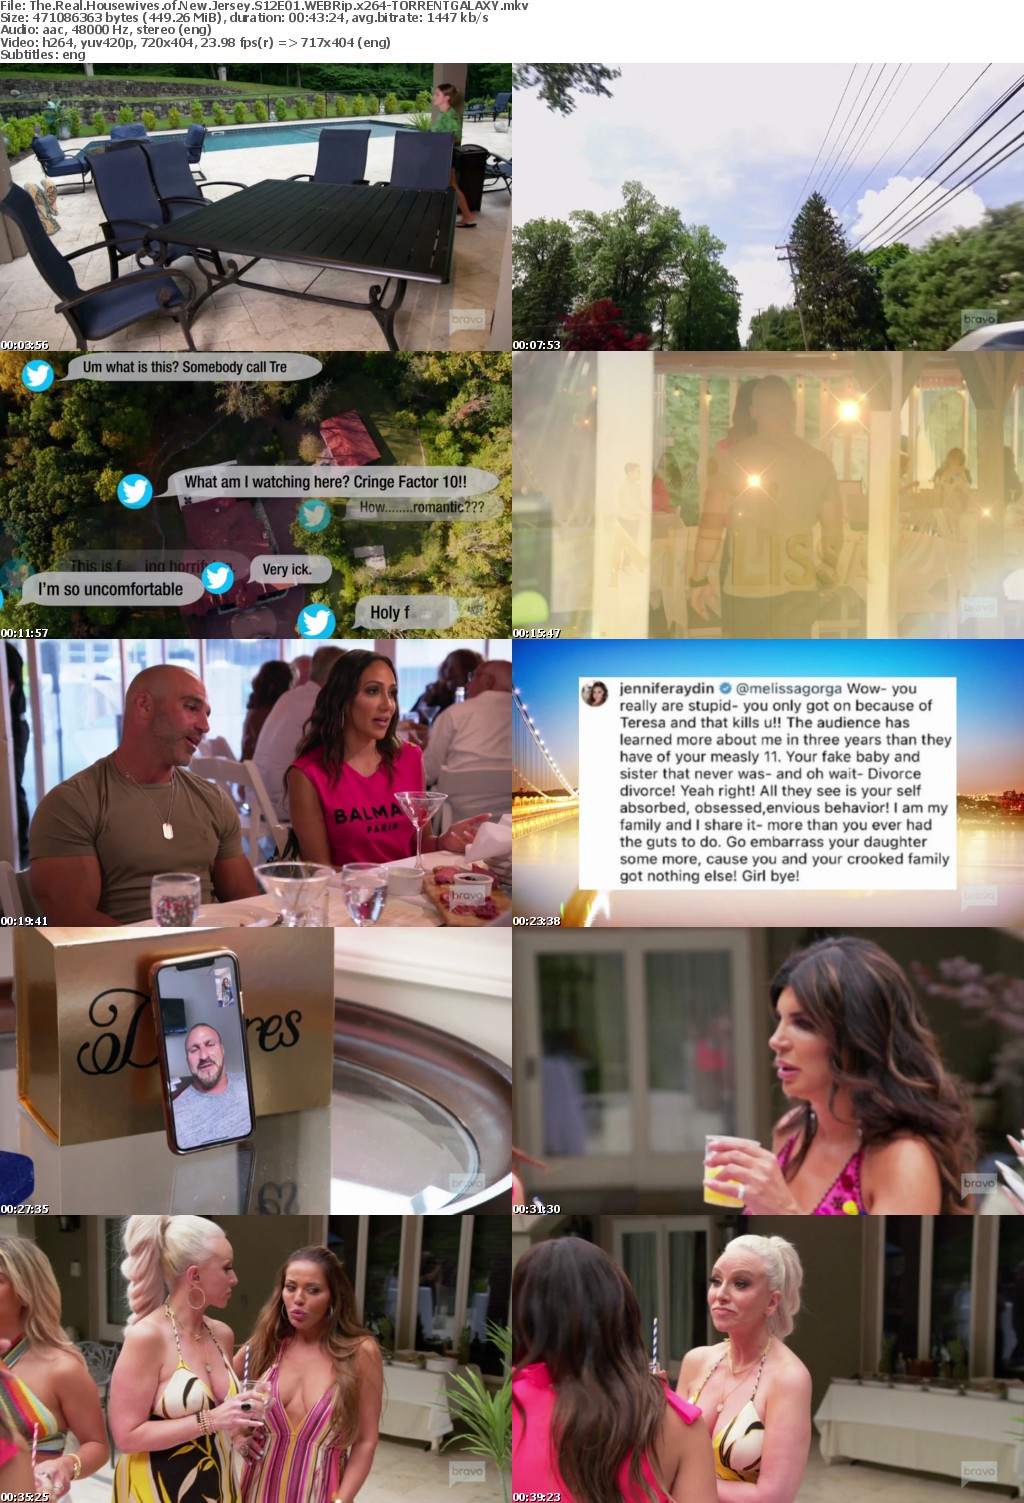 The Real Housewives of New Jersey S12E01 WEBRip x264-GALAXY